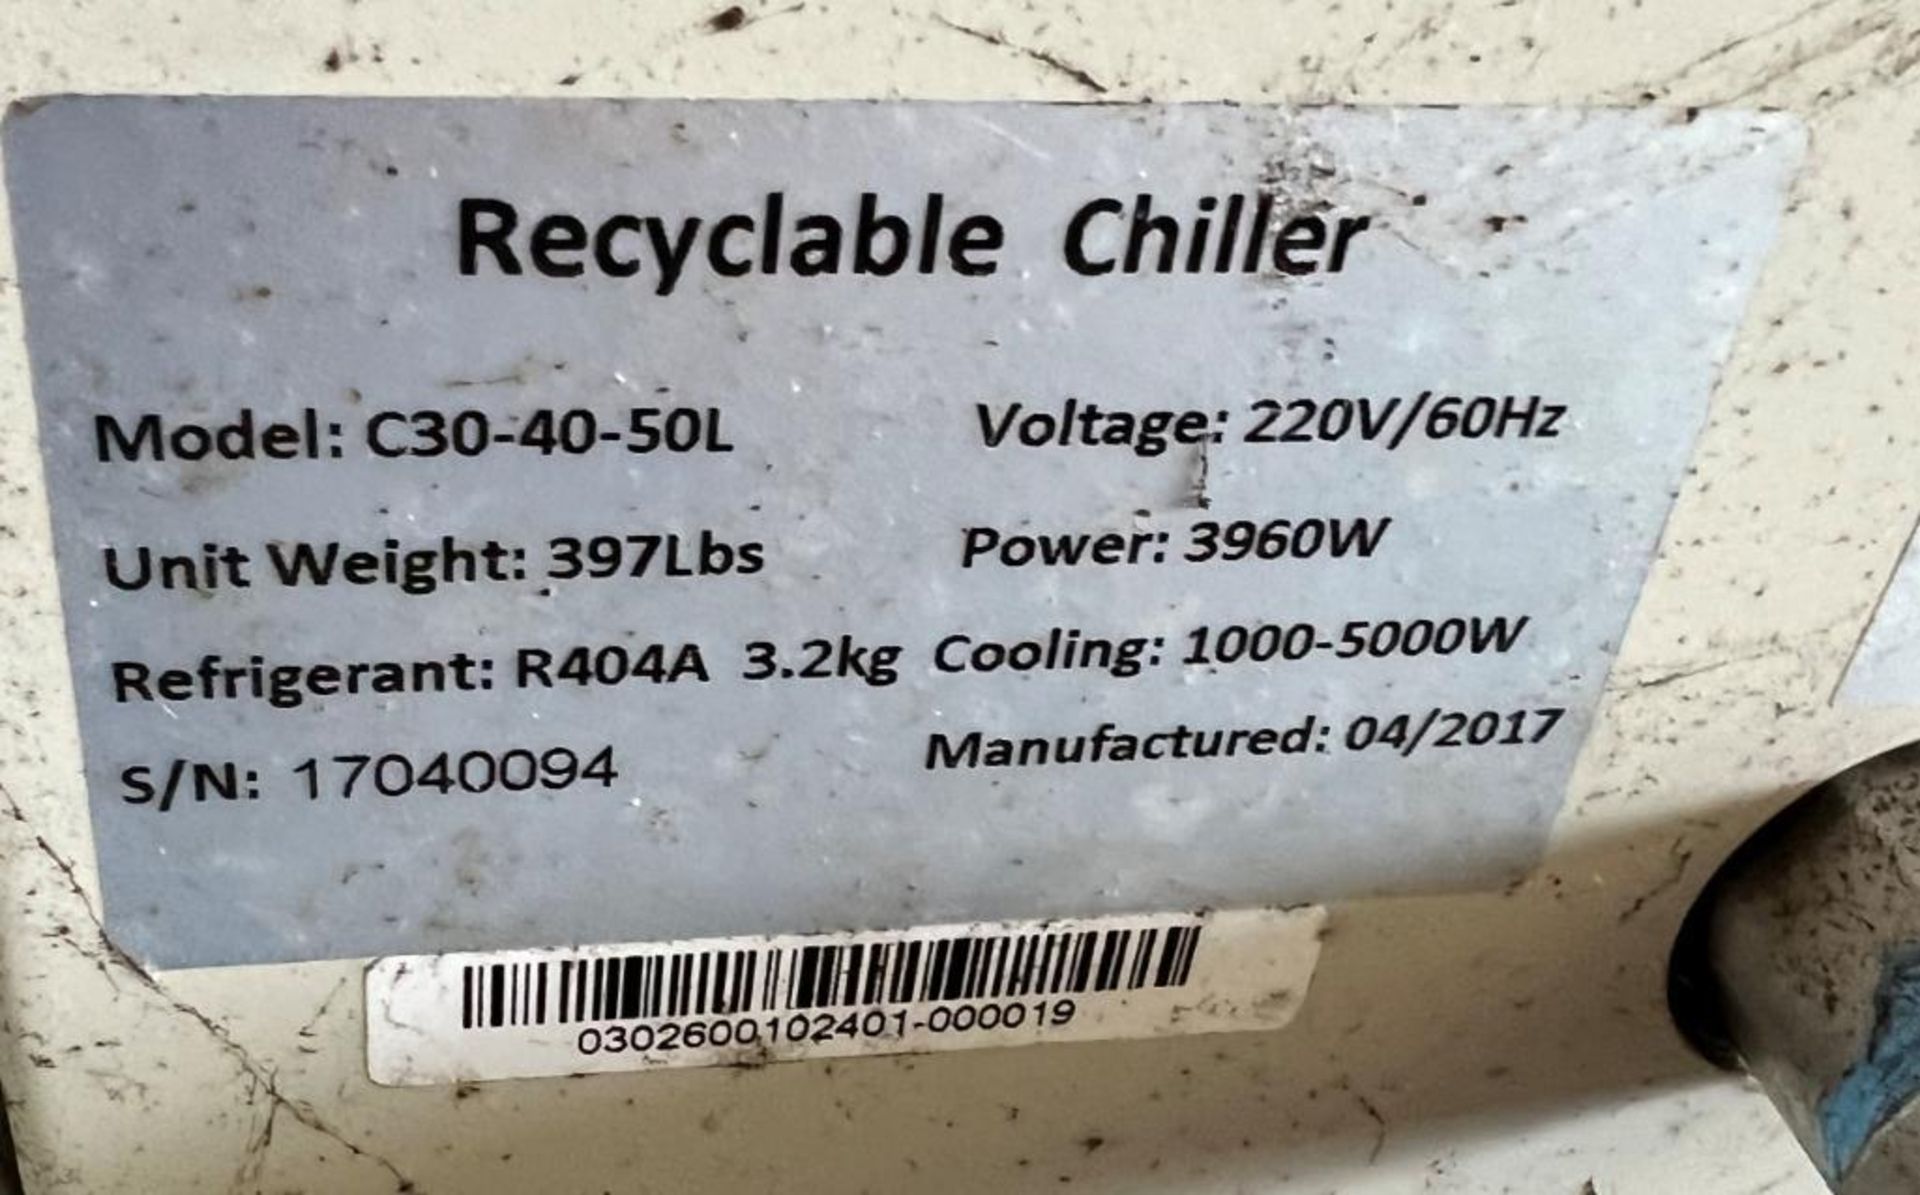 Across International Recyclable Chiller, Model C30-40-50L, Serial# 17040094, Built 04/2017. - Image 5 of 5